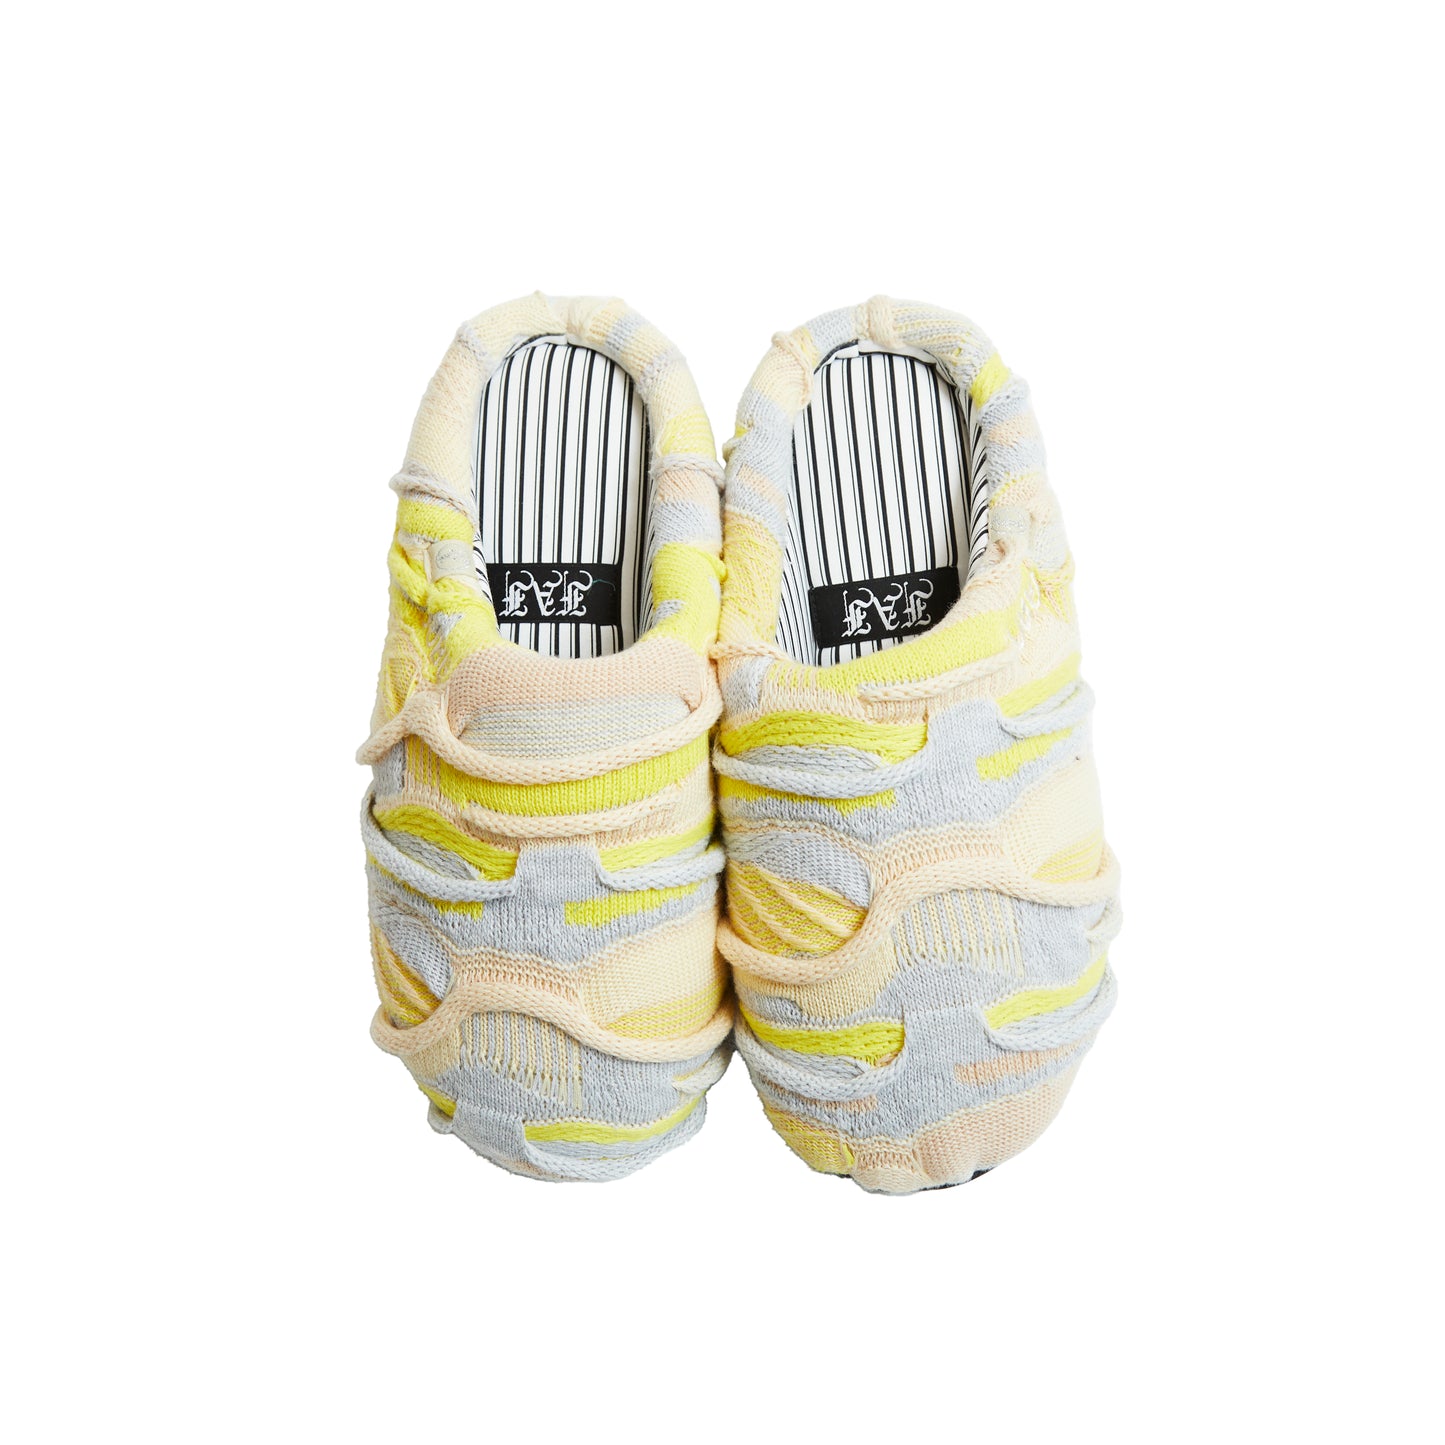 SUBU x FAF 3D Knit Sandals(Yellow)/FAKE AS FLOWERS